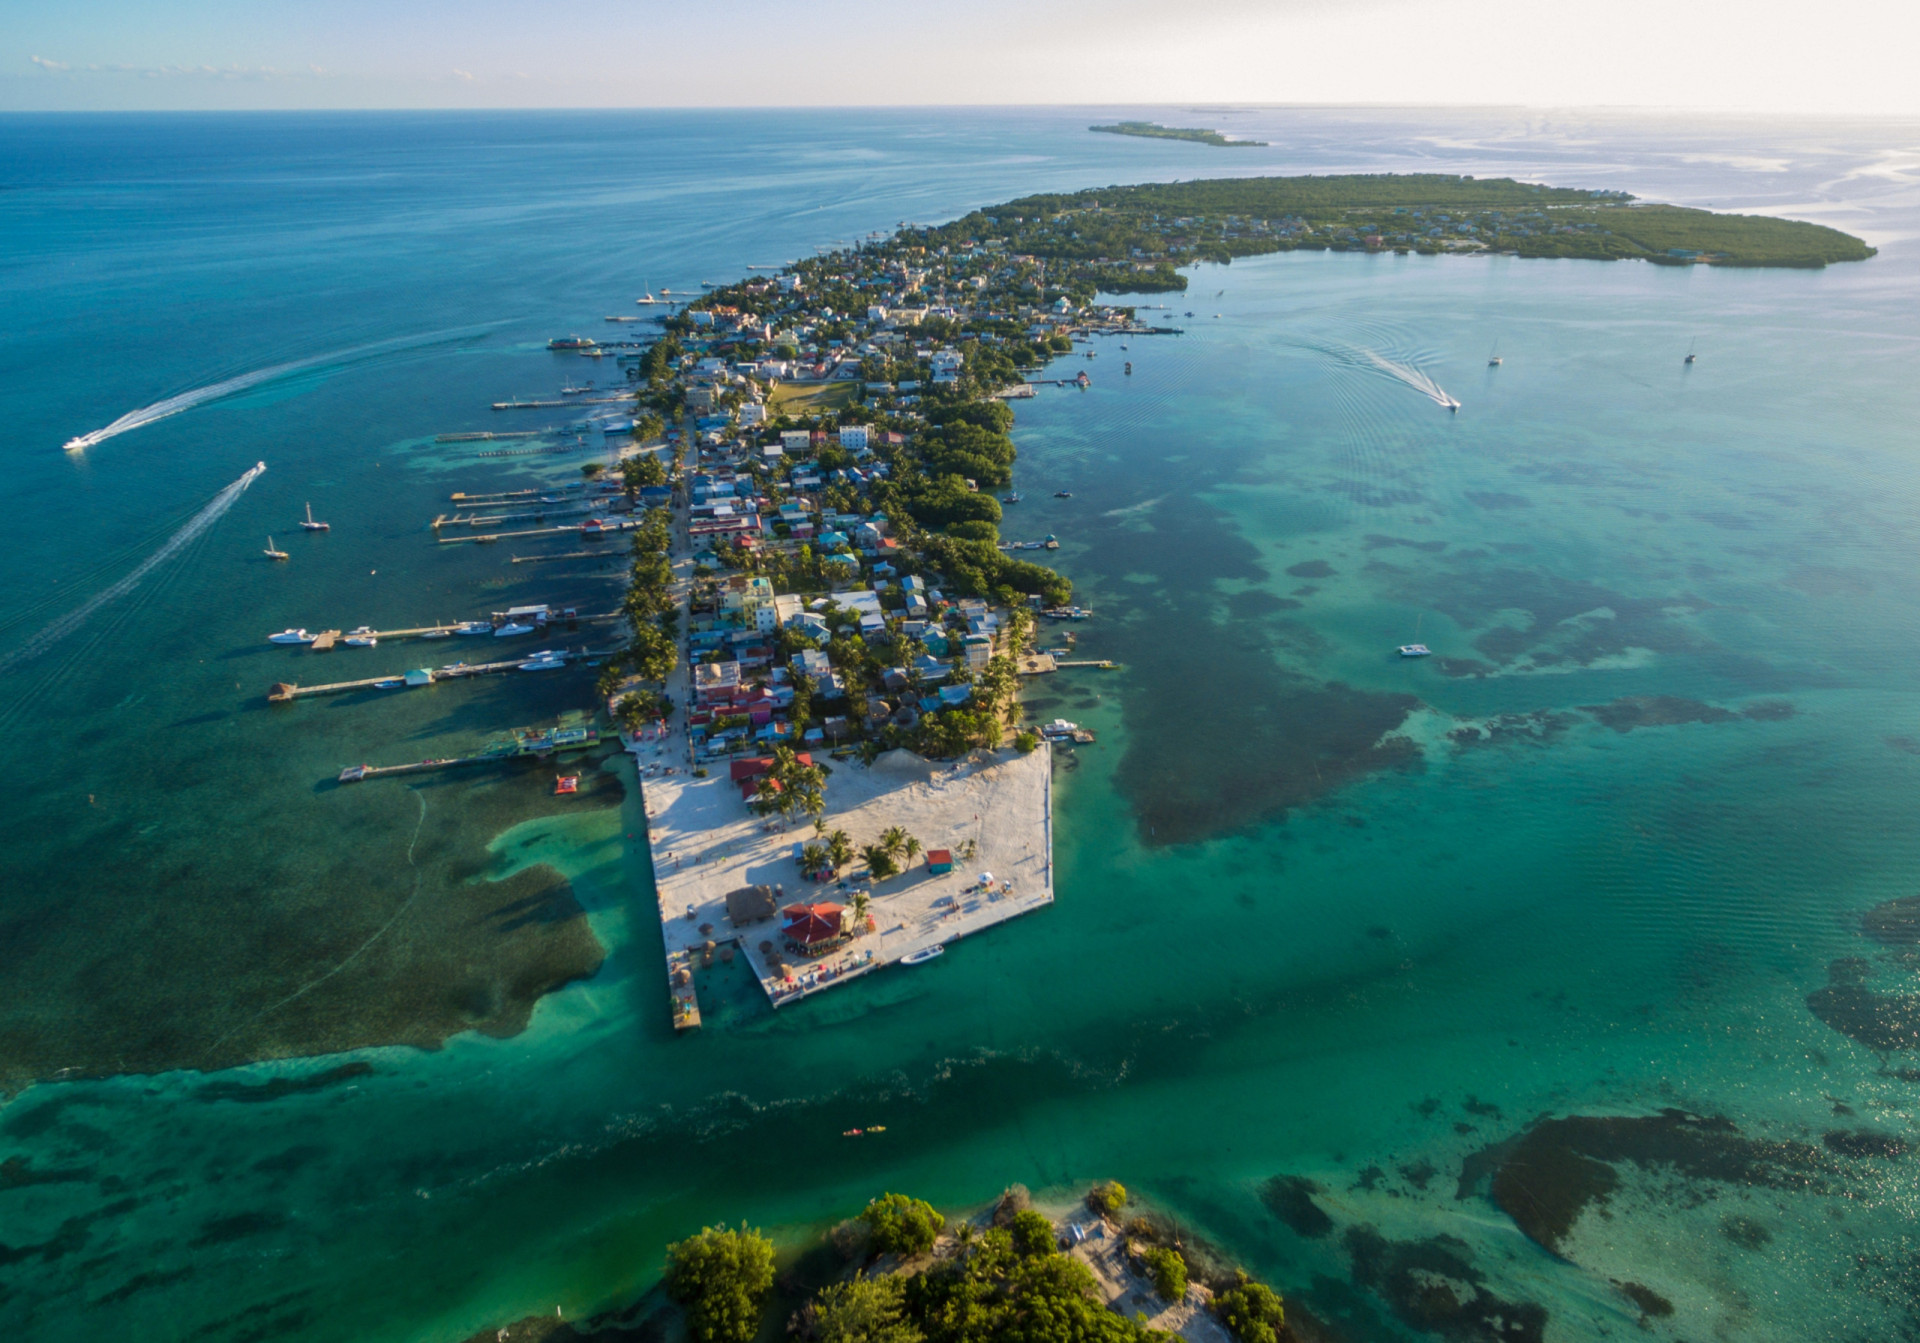 <p>Caye Caulker is Ambergris Caye's smaller, less-visited sister island and a prime stop for travelers looking to "go slow" and enjoy some relaxing downtime. The Caye Caulker Marine Reserve has dive sites on the Belize Barrier Reef.</p>